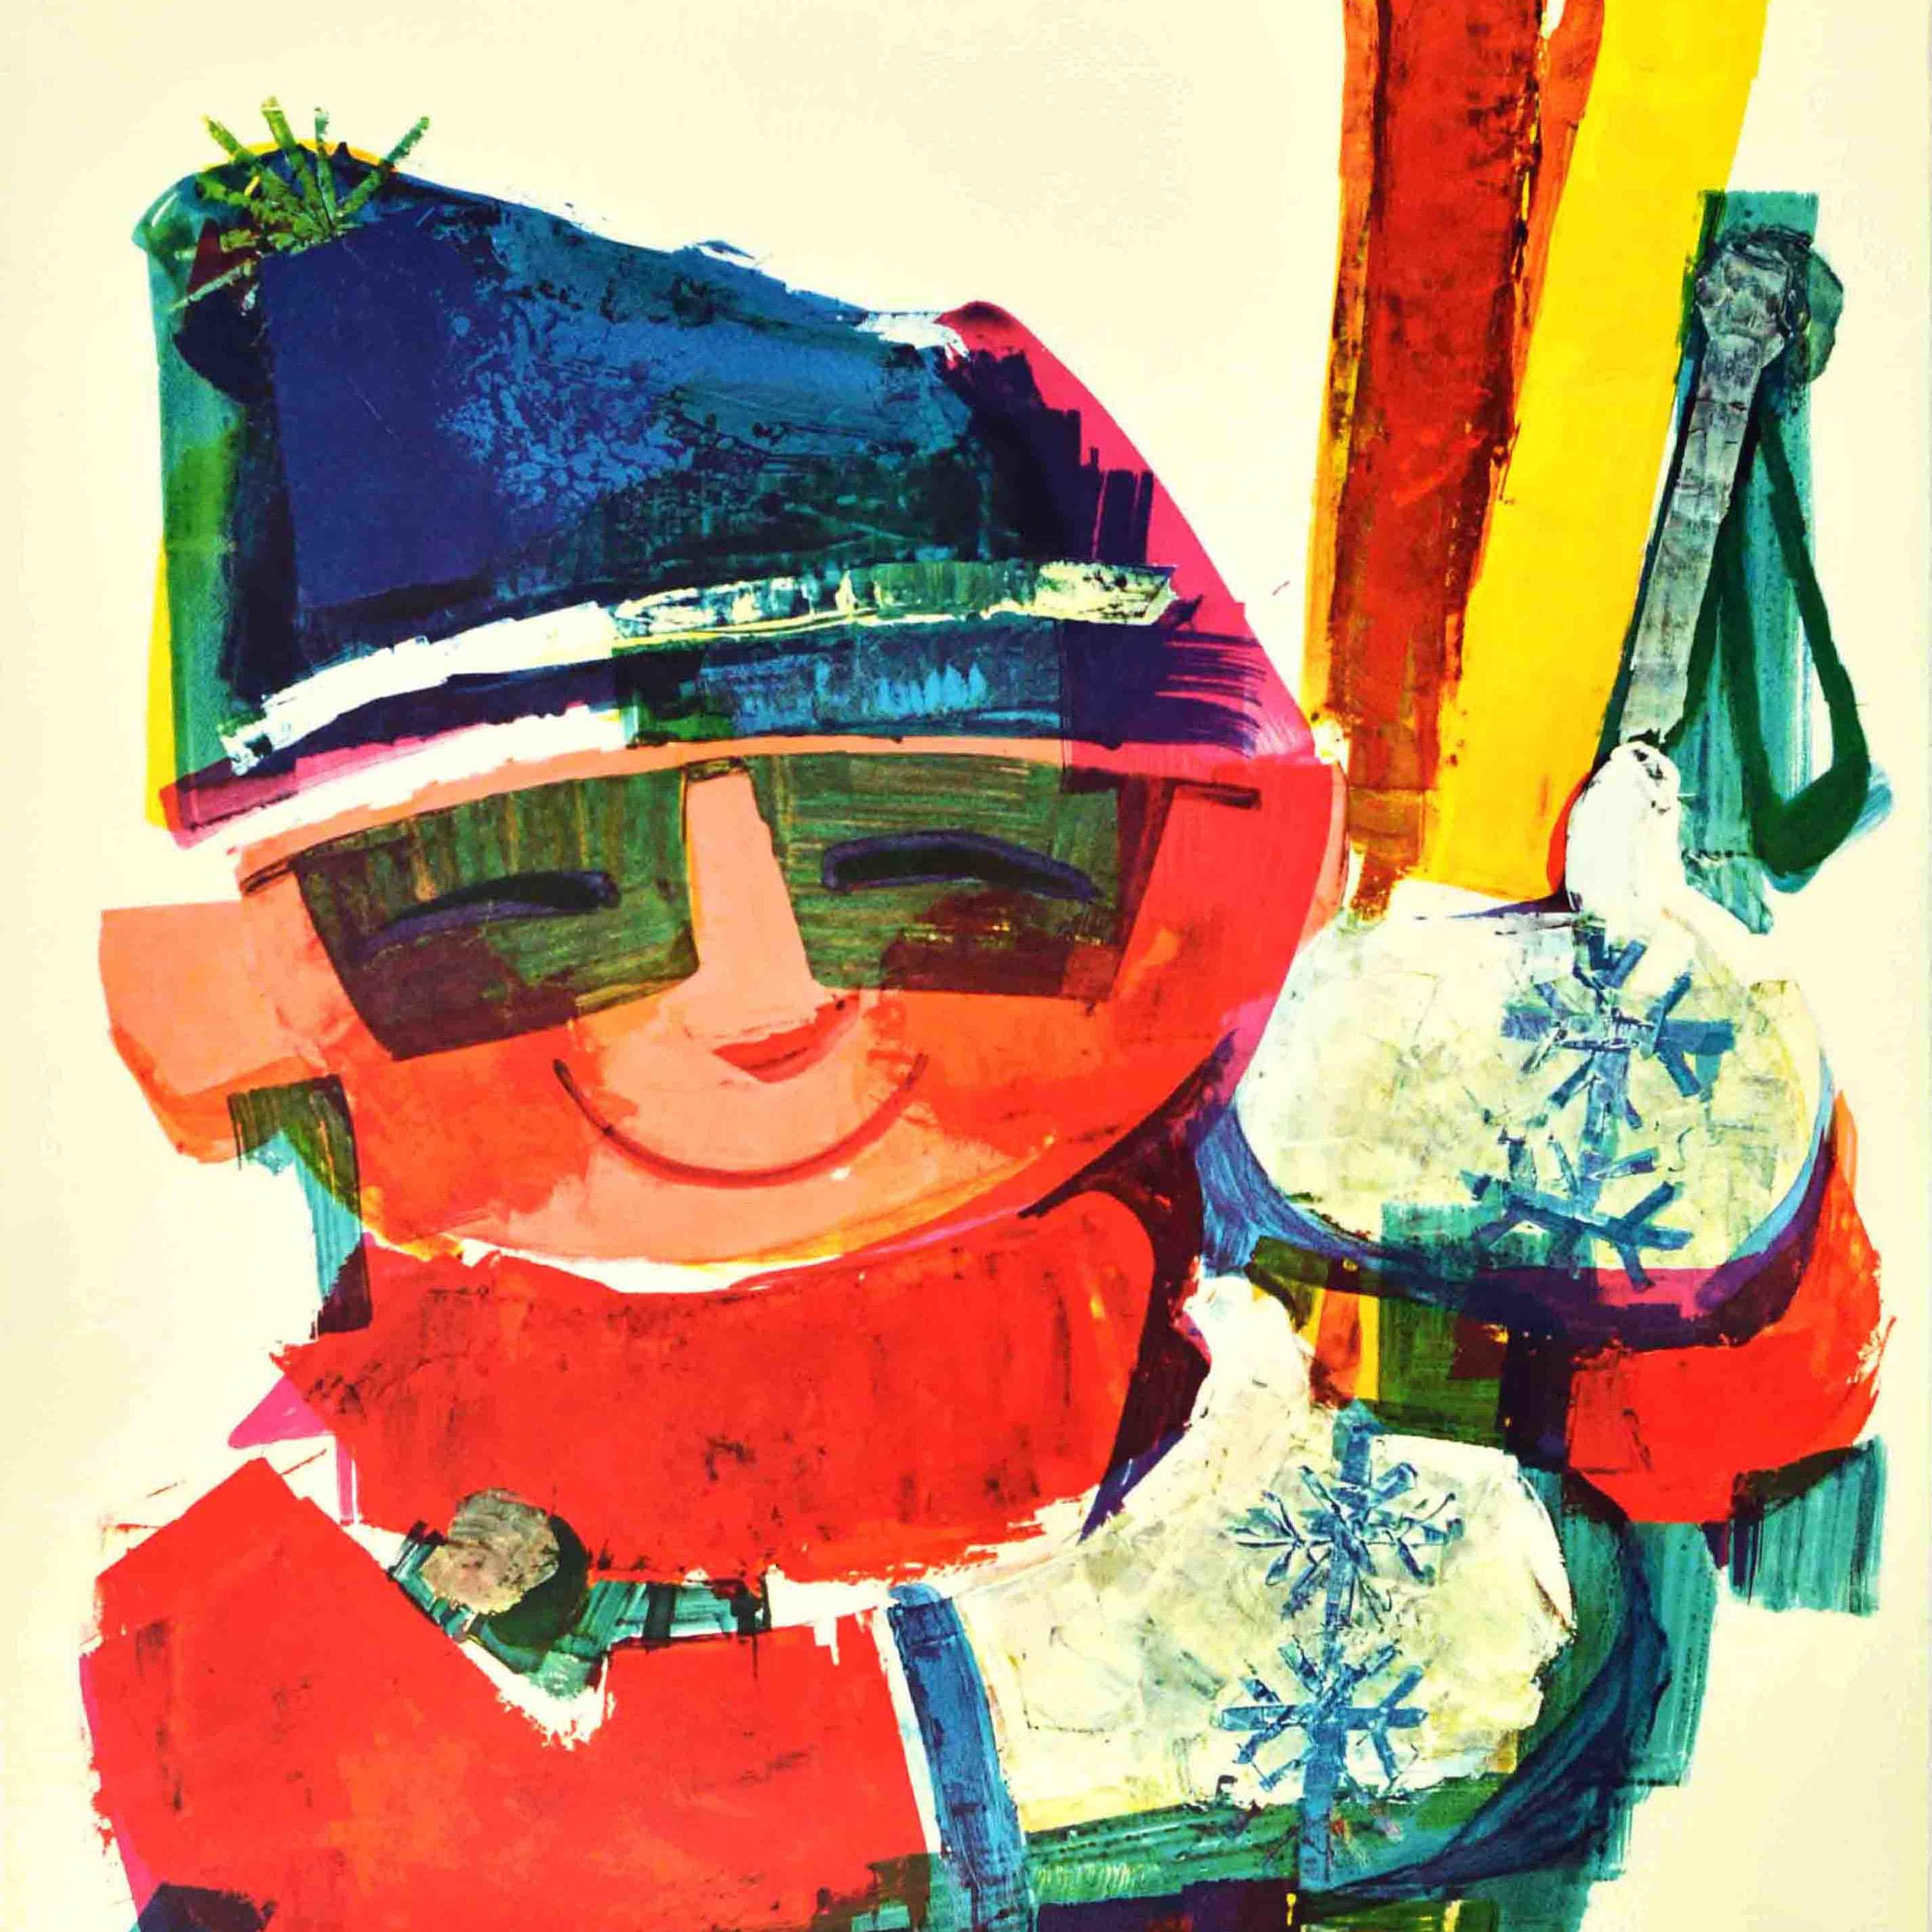 Original vintage winter sport travel poster - La haute Baviere vous attend cet hiver! / Upper Bavaria awaits you this winter! - featuring colourful artwork of a smiling skier wearing sunglasses and a bobble hat with snowflakes on his mittens,